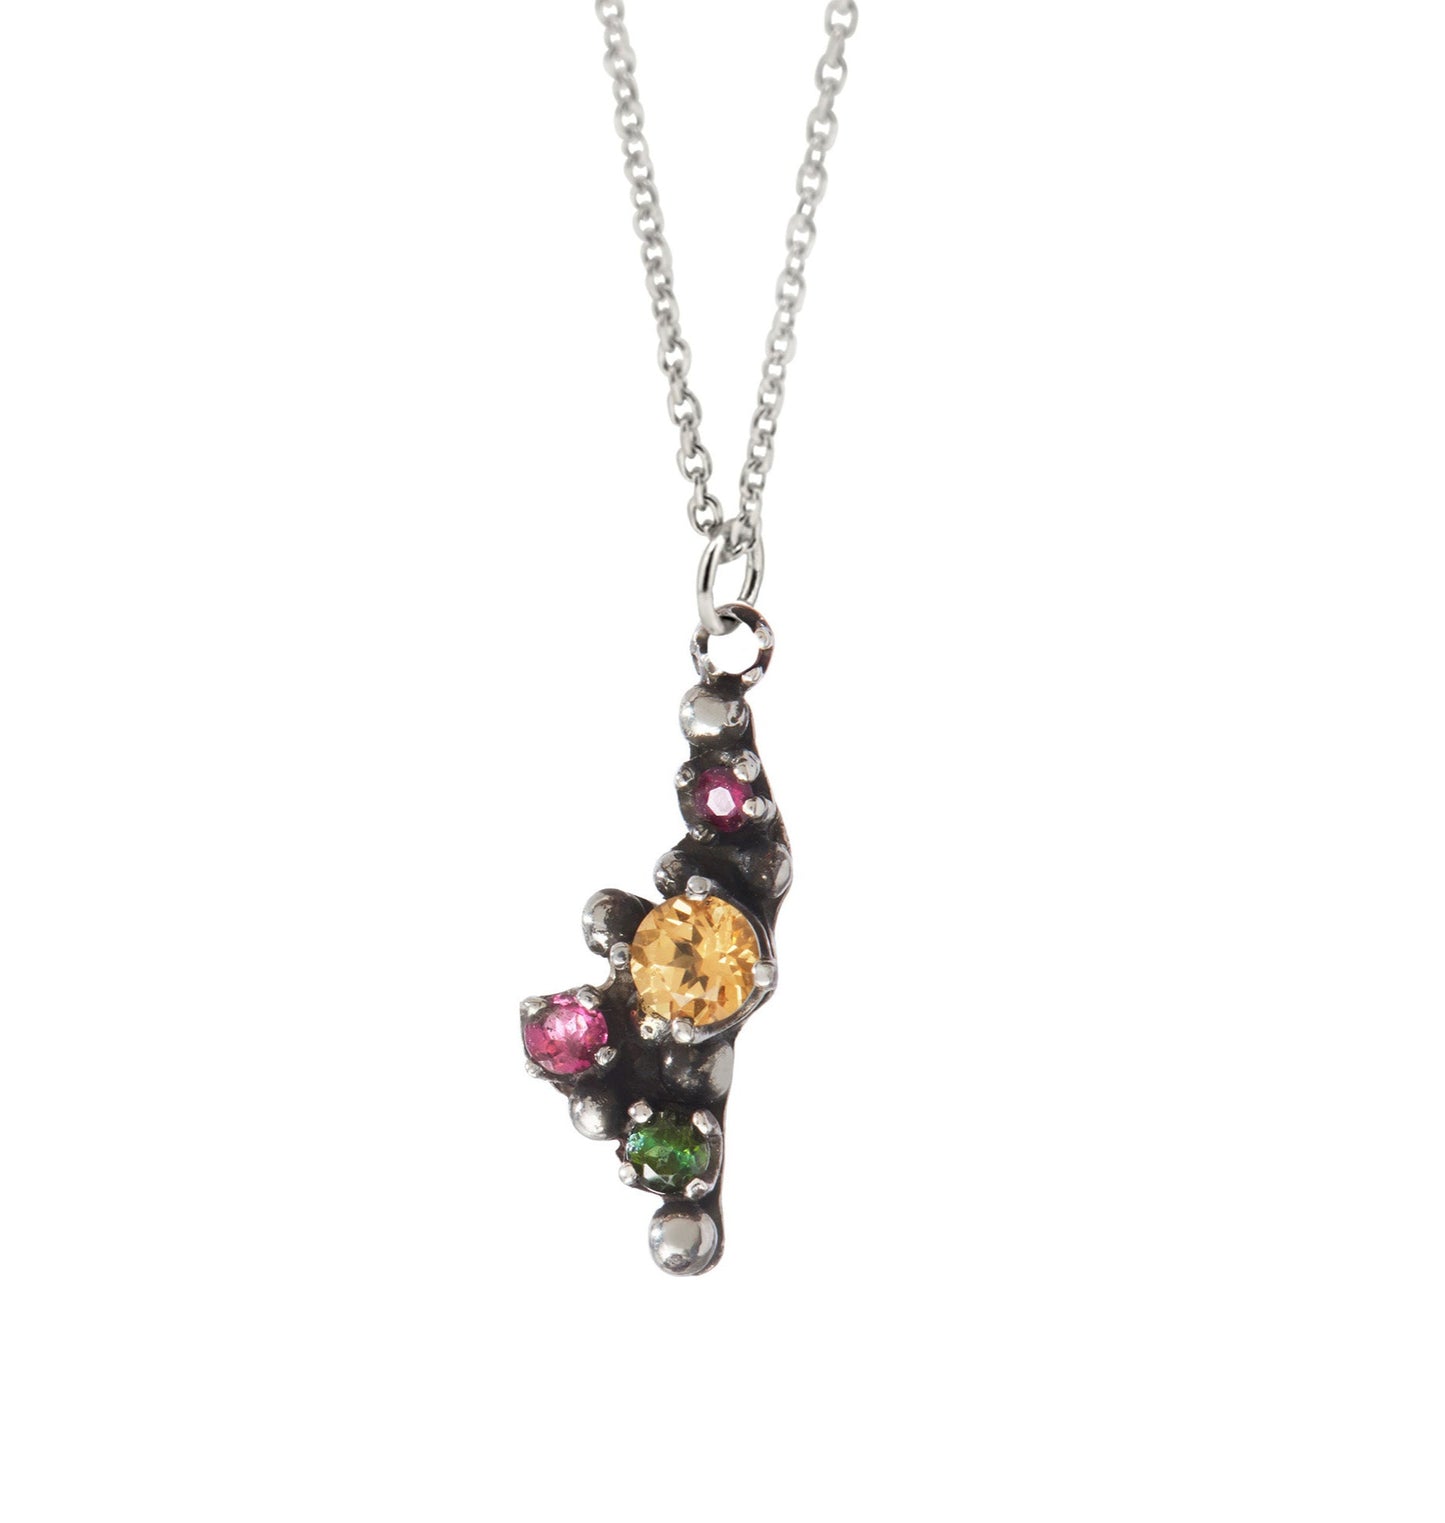 The Cascade of Flowers Necklace